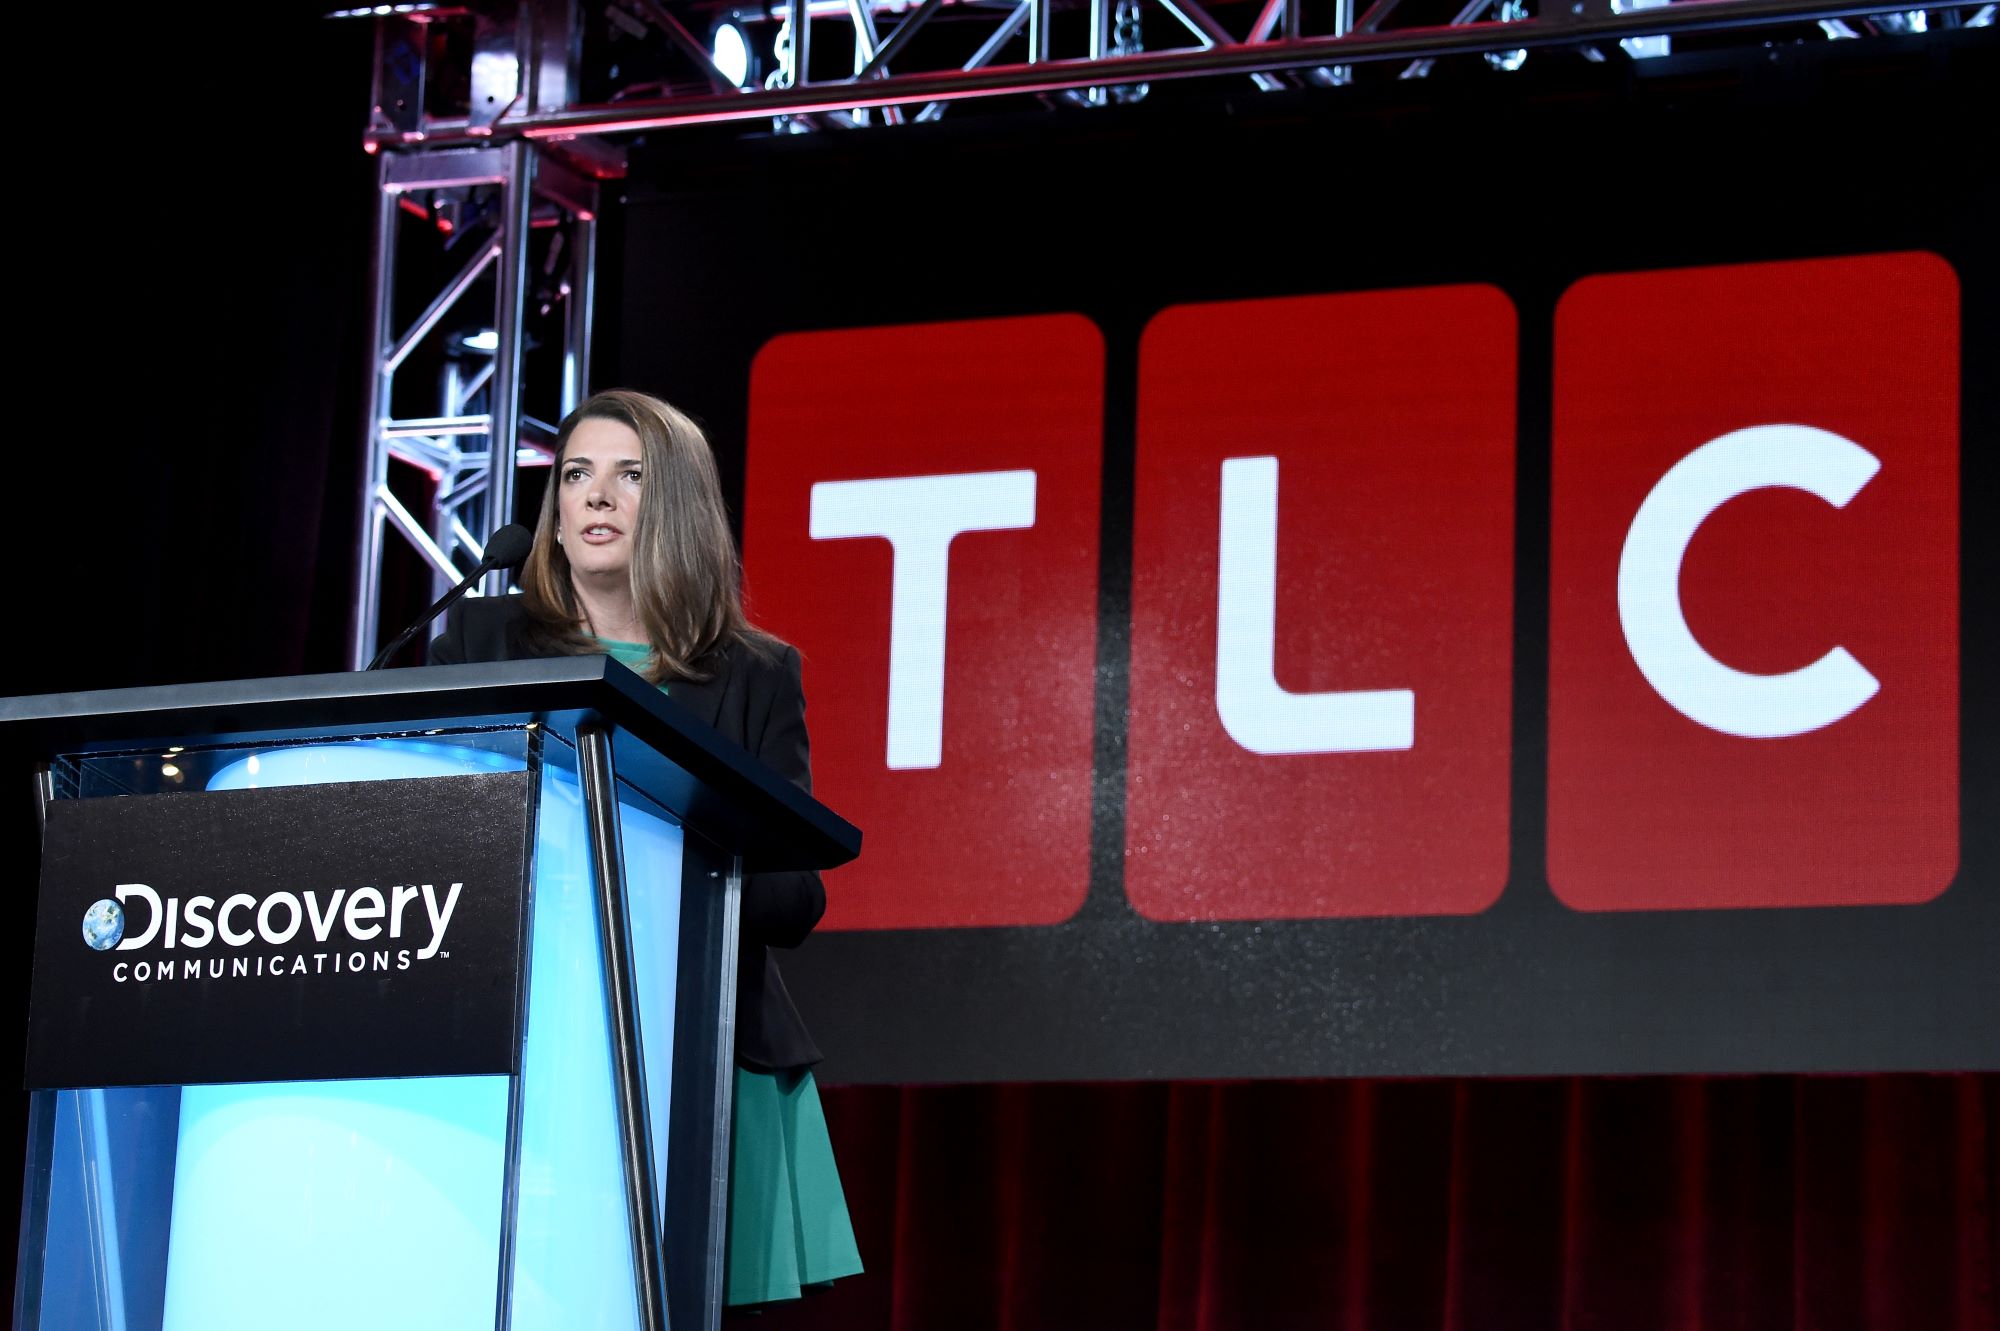 TLC General Manager Nancy Daniels standing in front of a TLC sign speaking at a podium.